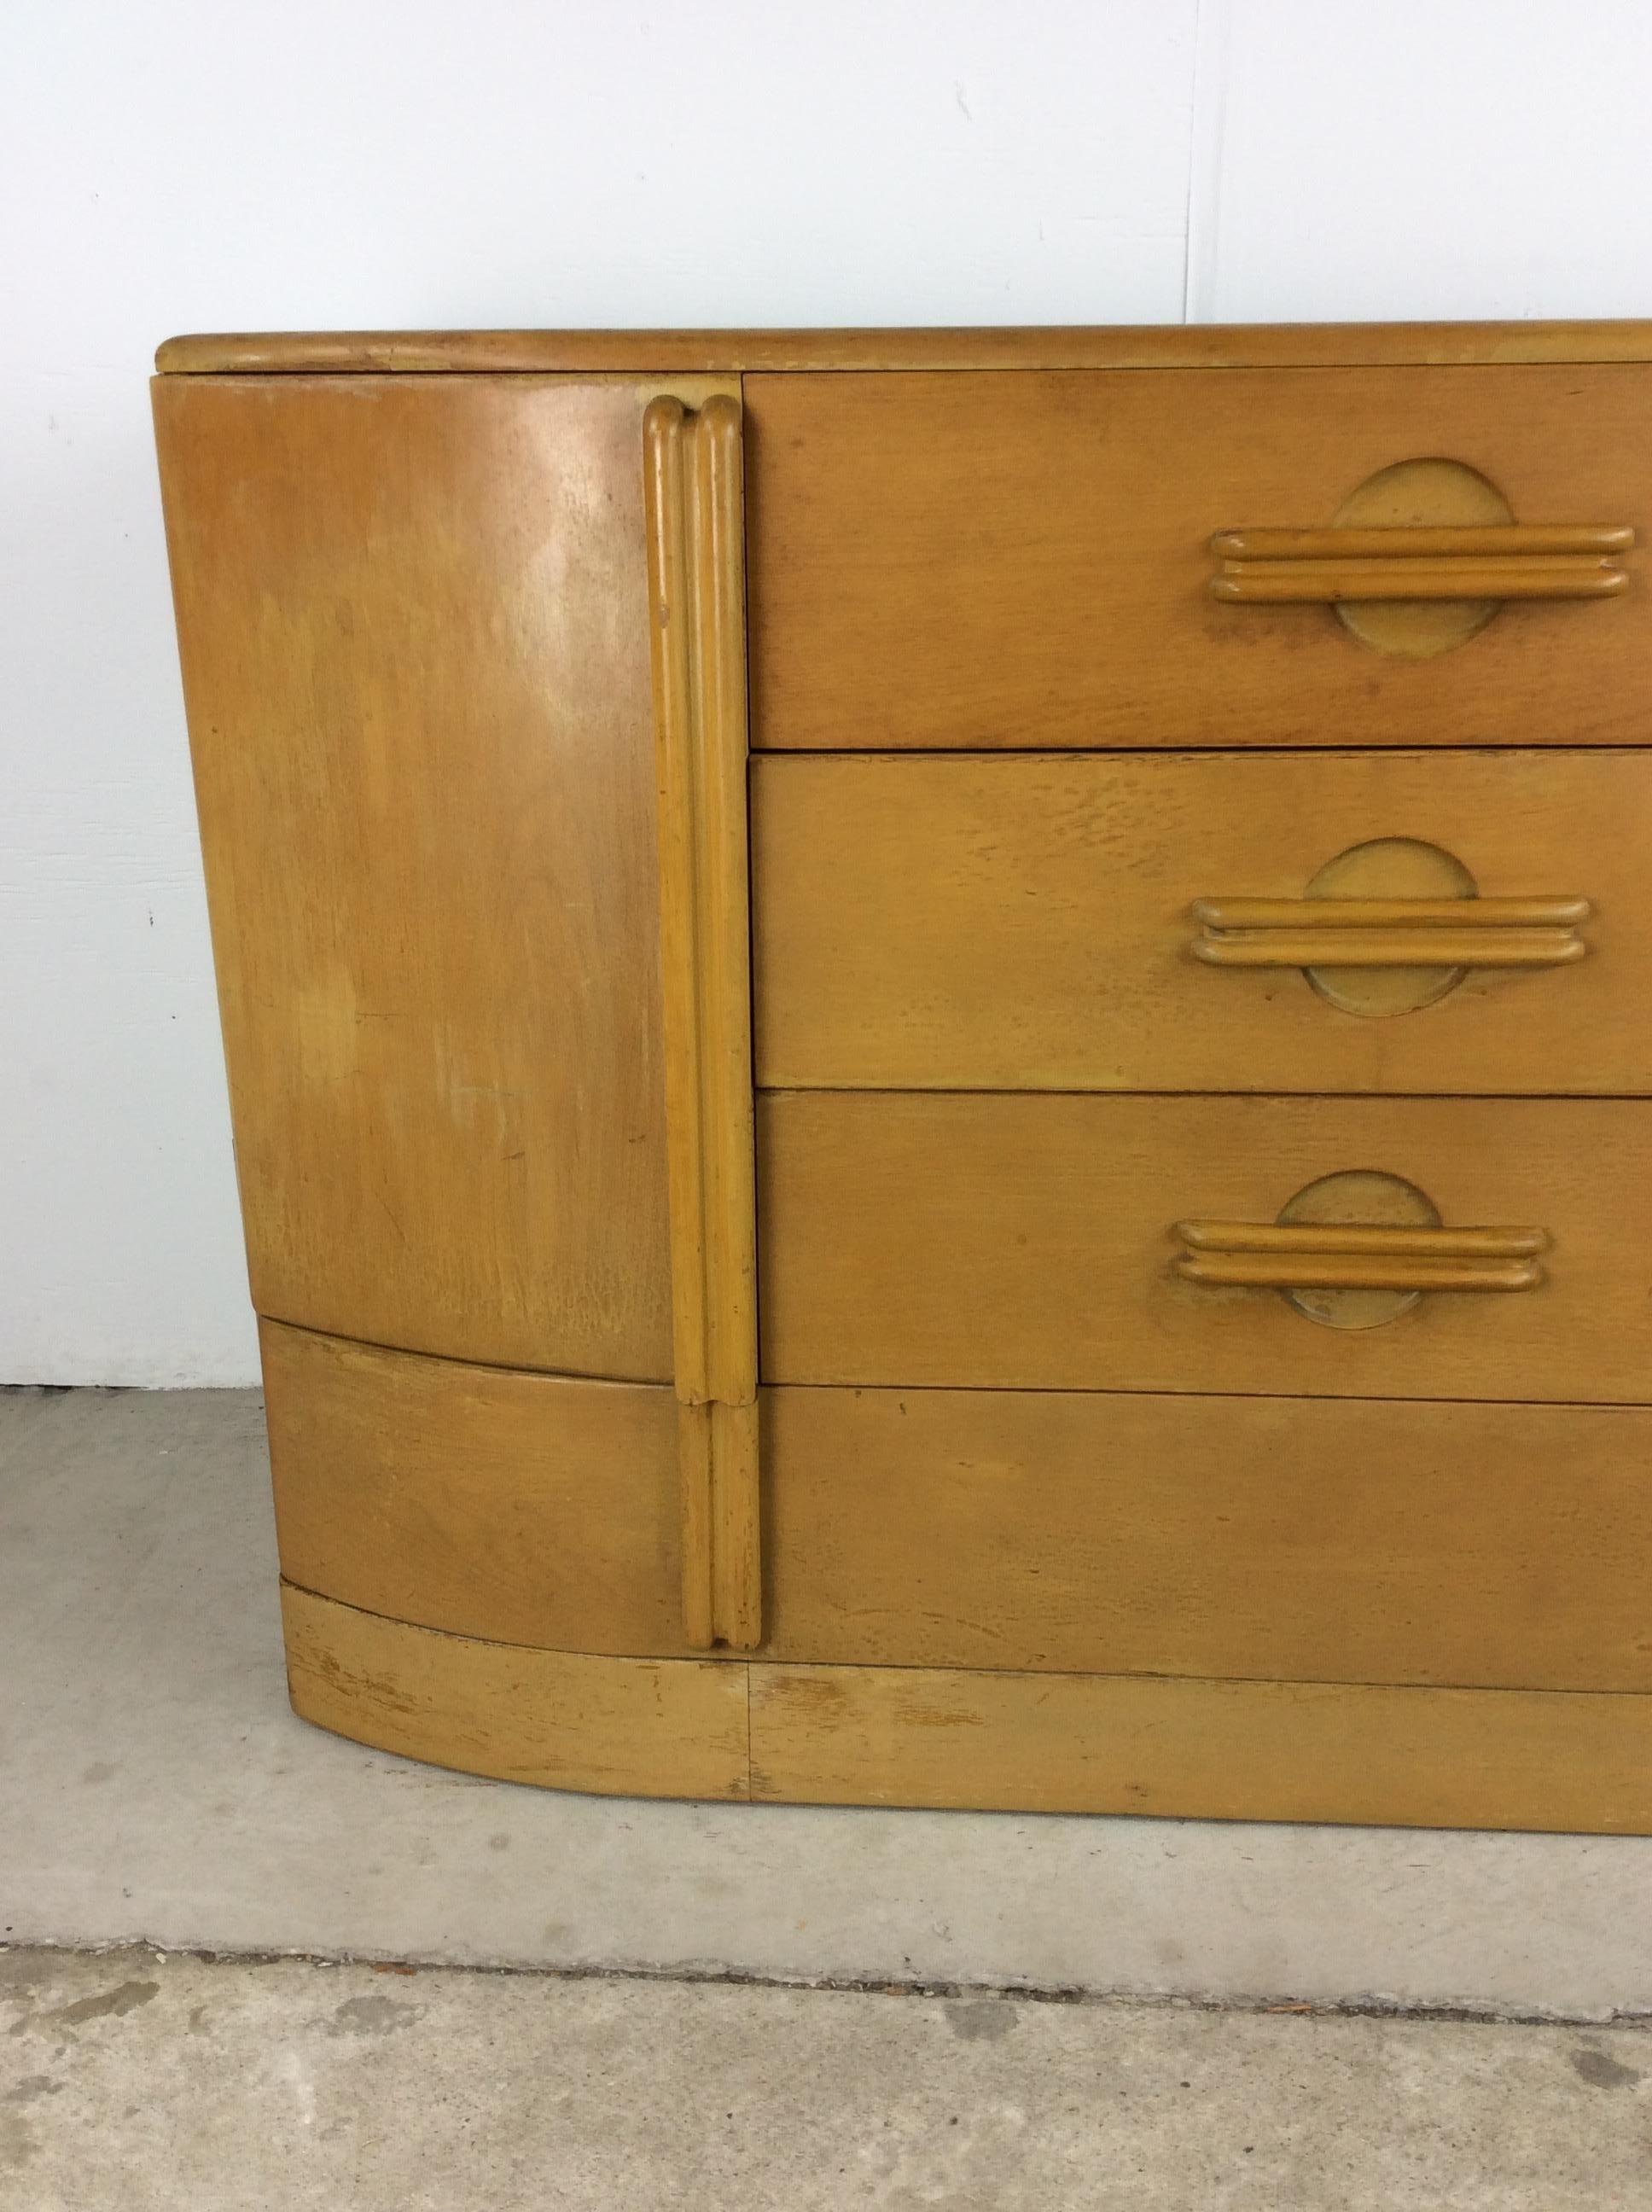 This Mid-Century Modern sideboard by Heywood Wakefield features four dovetailed drawers, two cabinets with interior shelving, sculpted cabinet and drawer pulls.

Dimensions: 52w 19d 34h


.